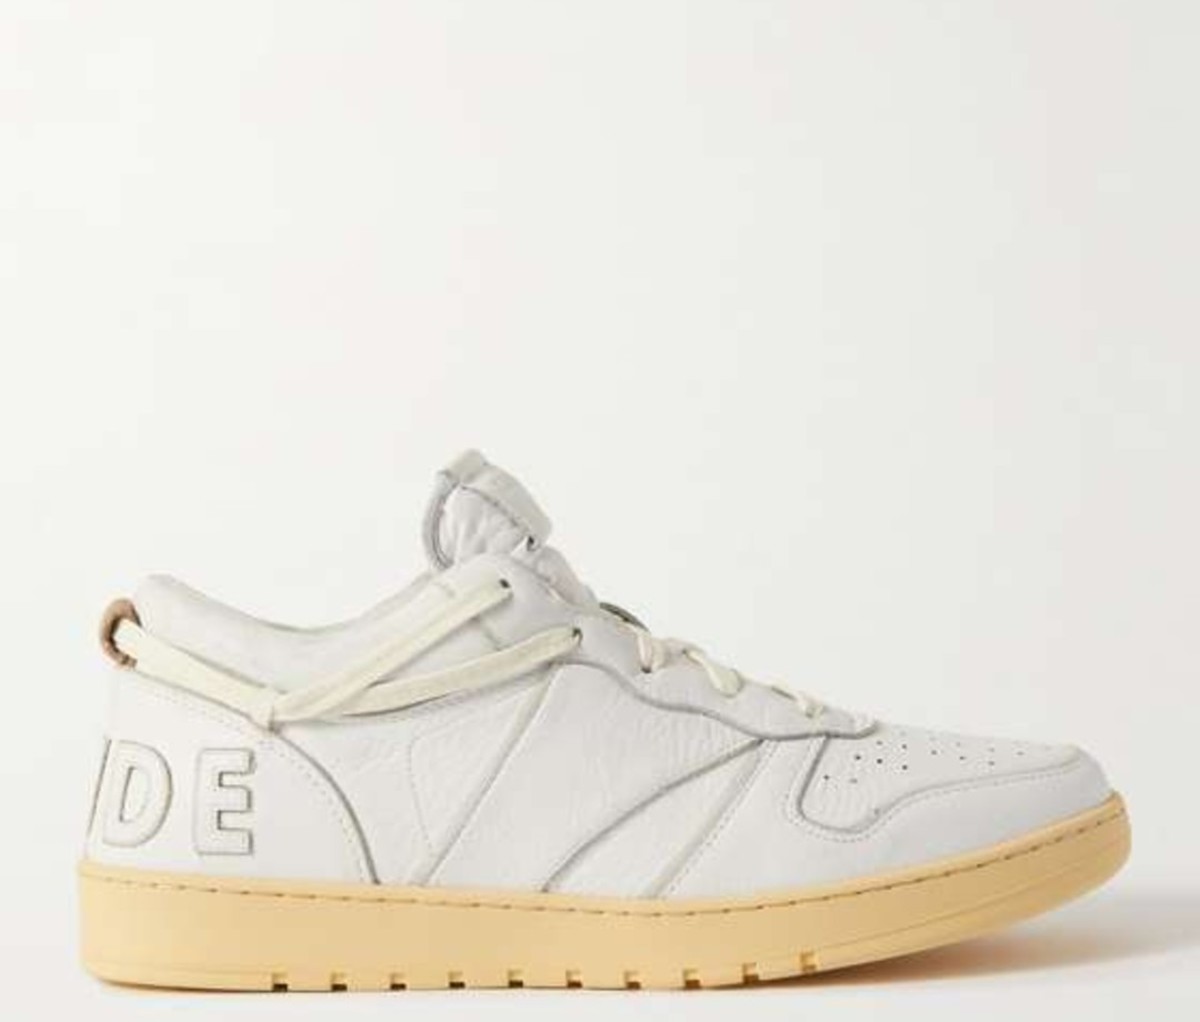 Rhude Rhecess Logo-Appliqued Distressed Leather Sneakers